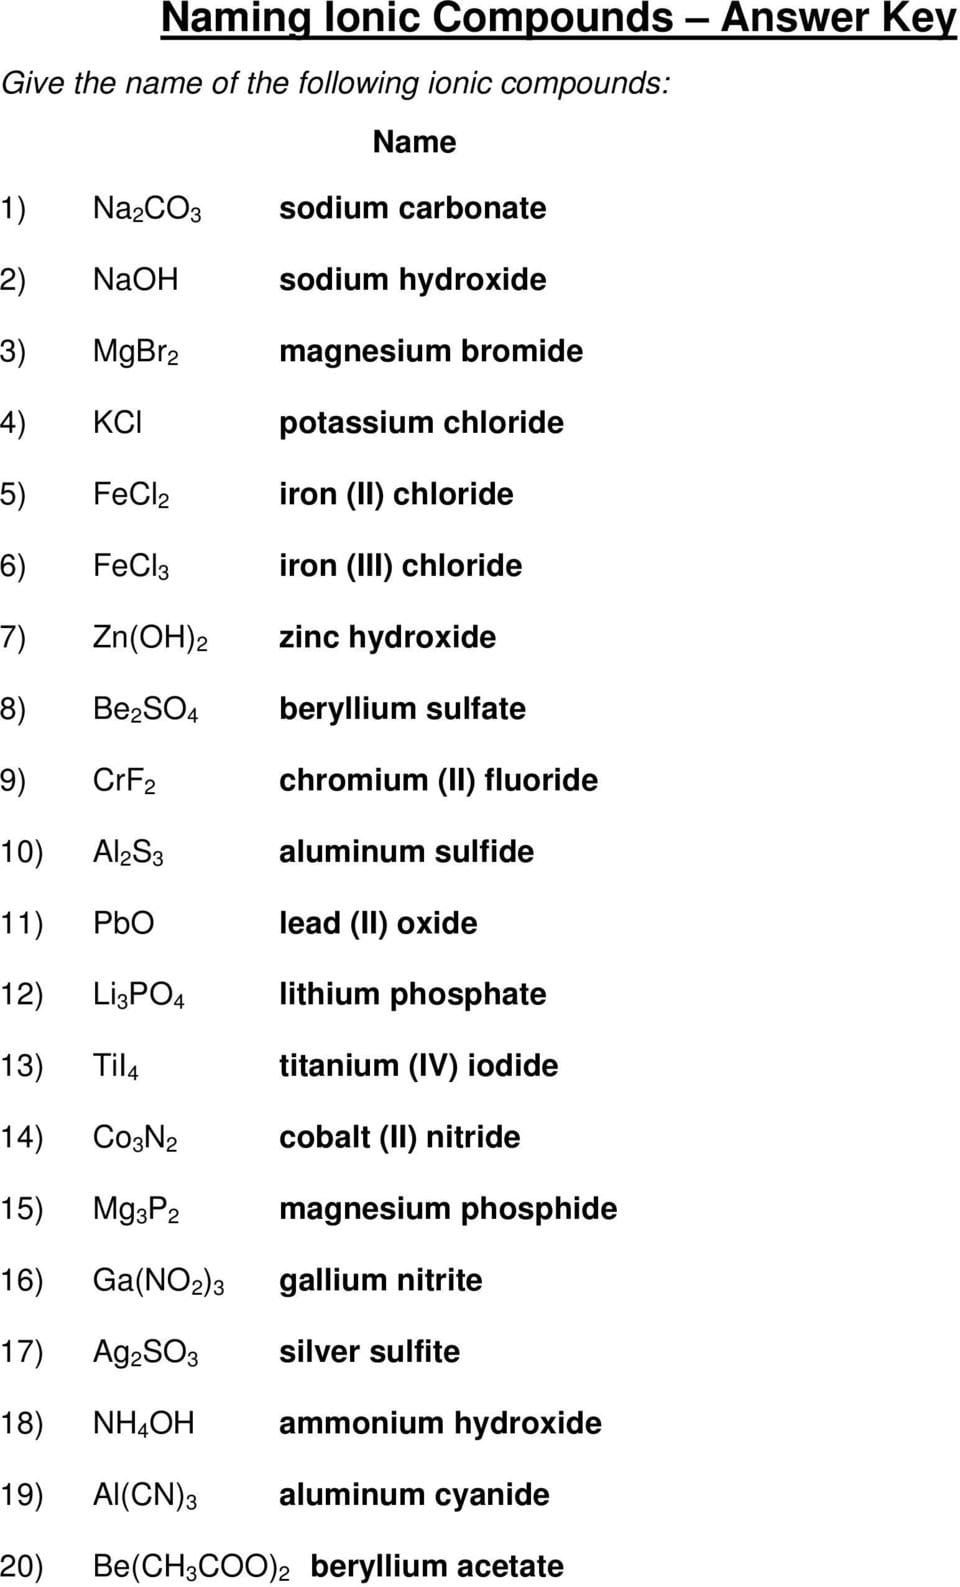 Naming Ionic Compounds Answer Key  Pdf As Well As Naming Ions And Chemical Compounds Worksheet 1